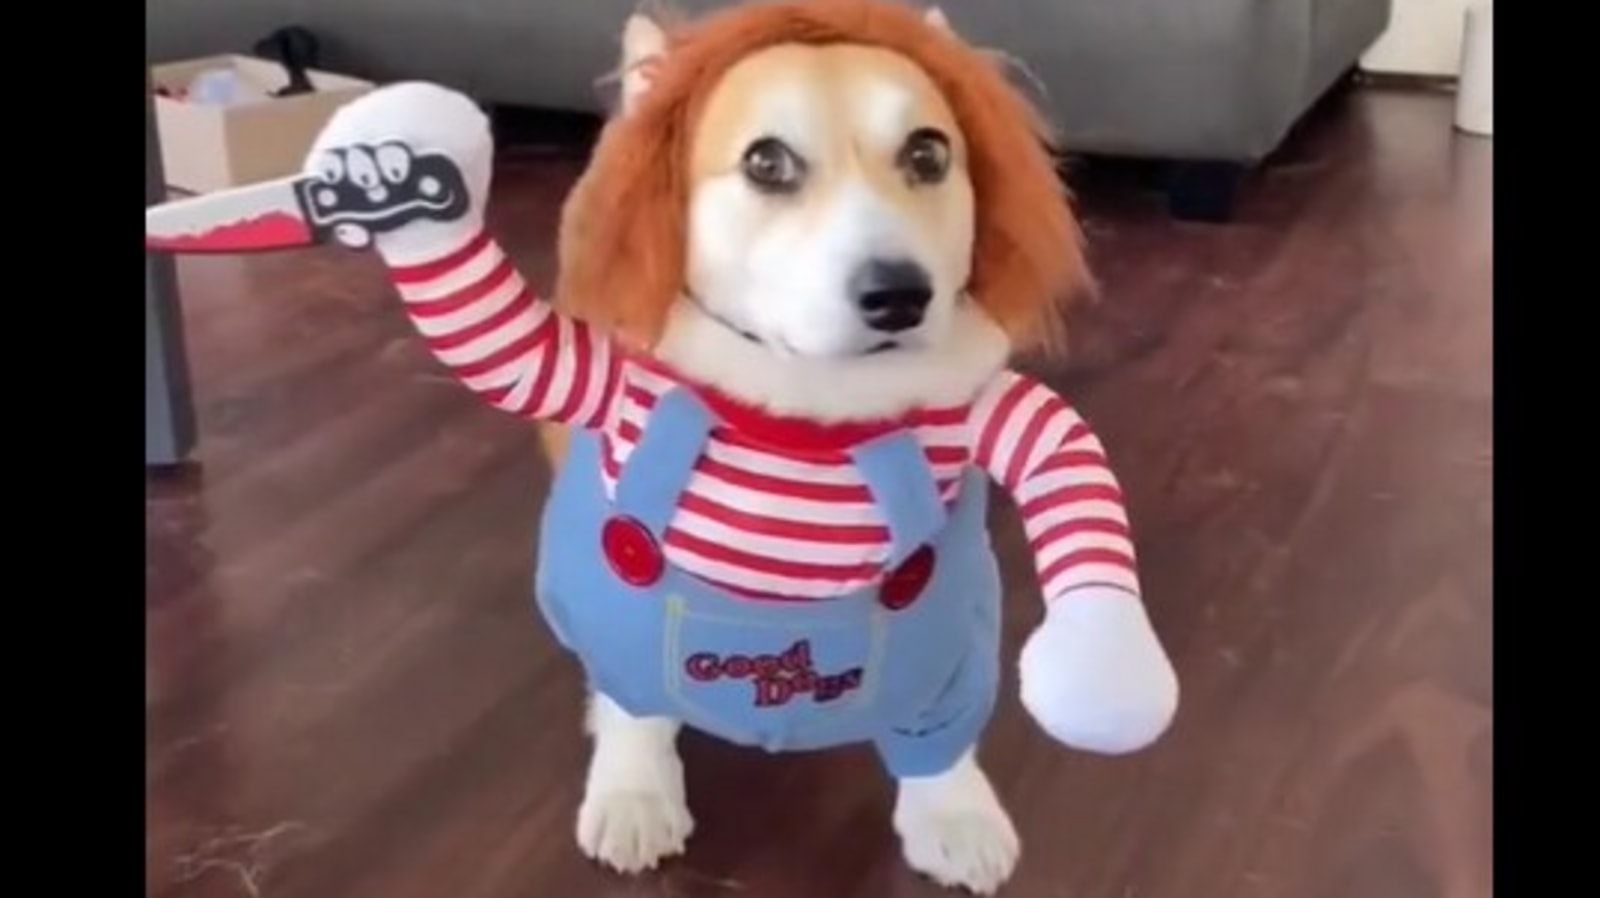 Dog ‘going for’ a scary look with Chucky costume fails, ends up looking ...